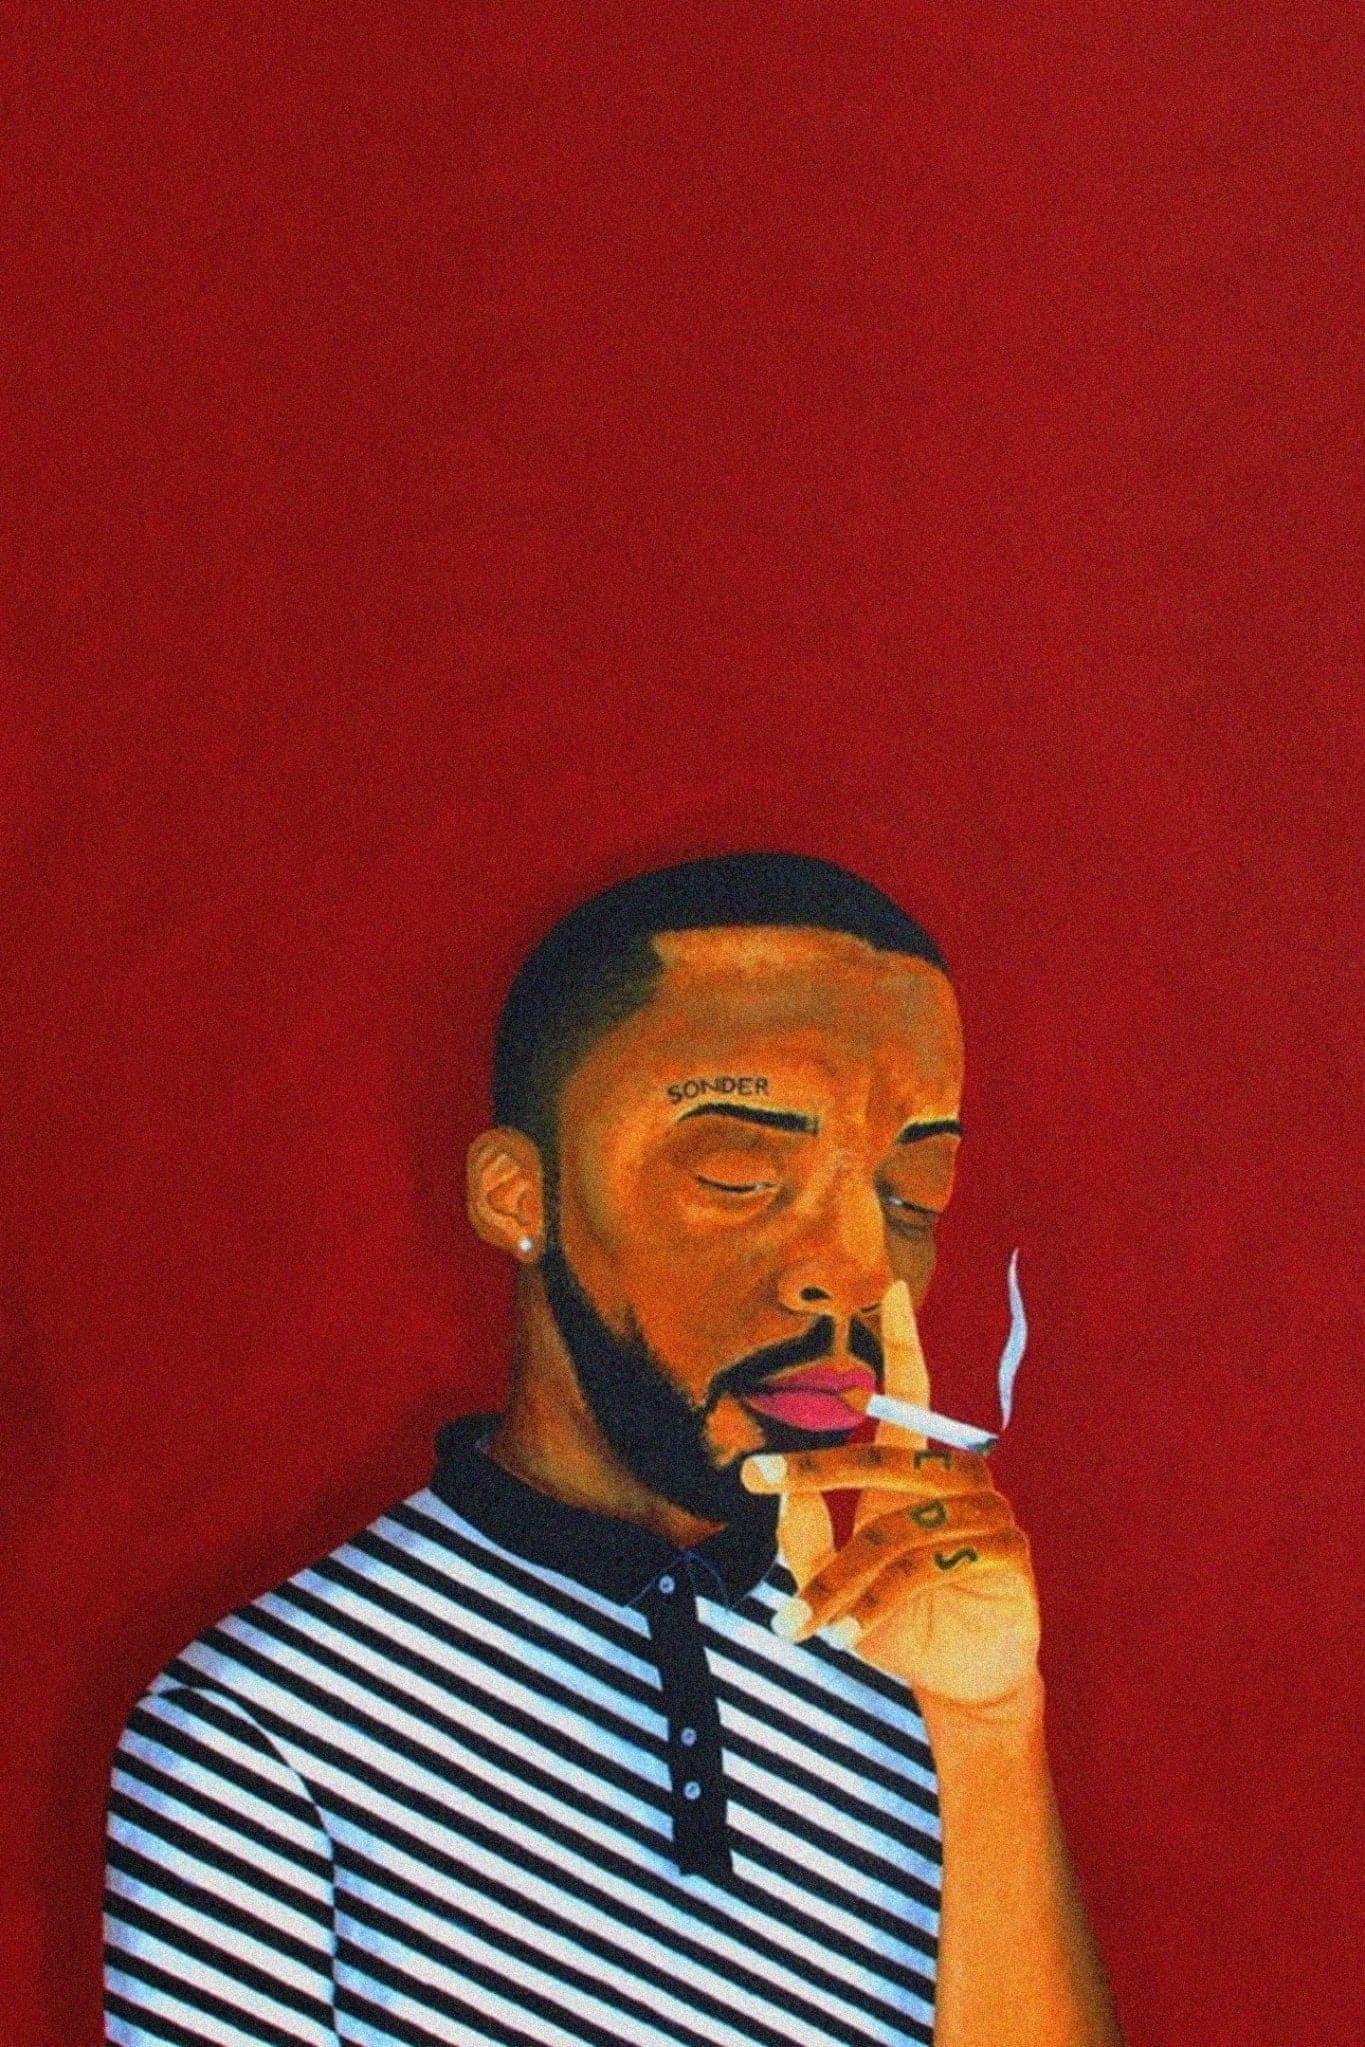 Brent Faiyaz Sonder Son Painting Poster Posters Plug